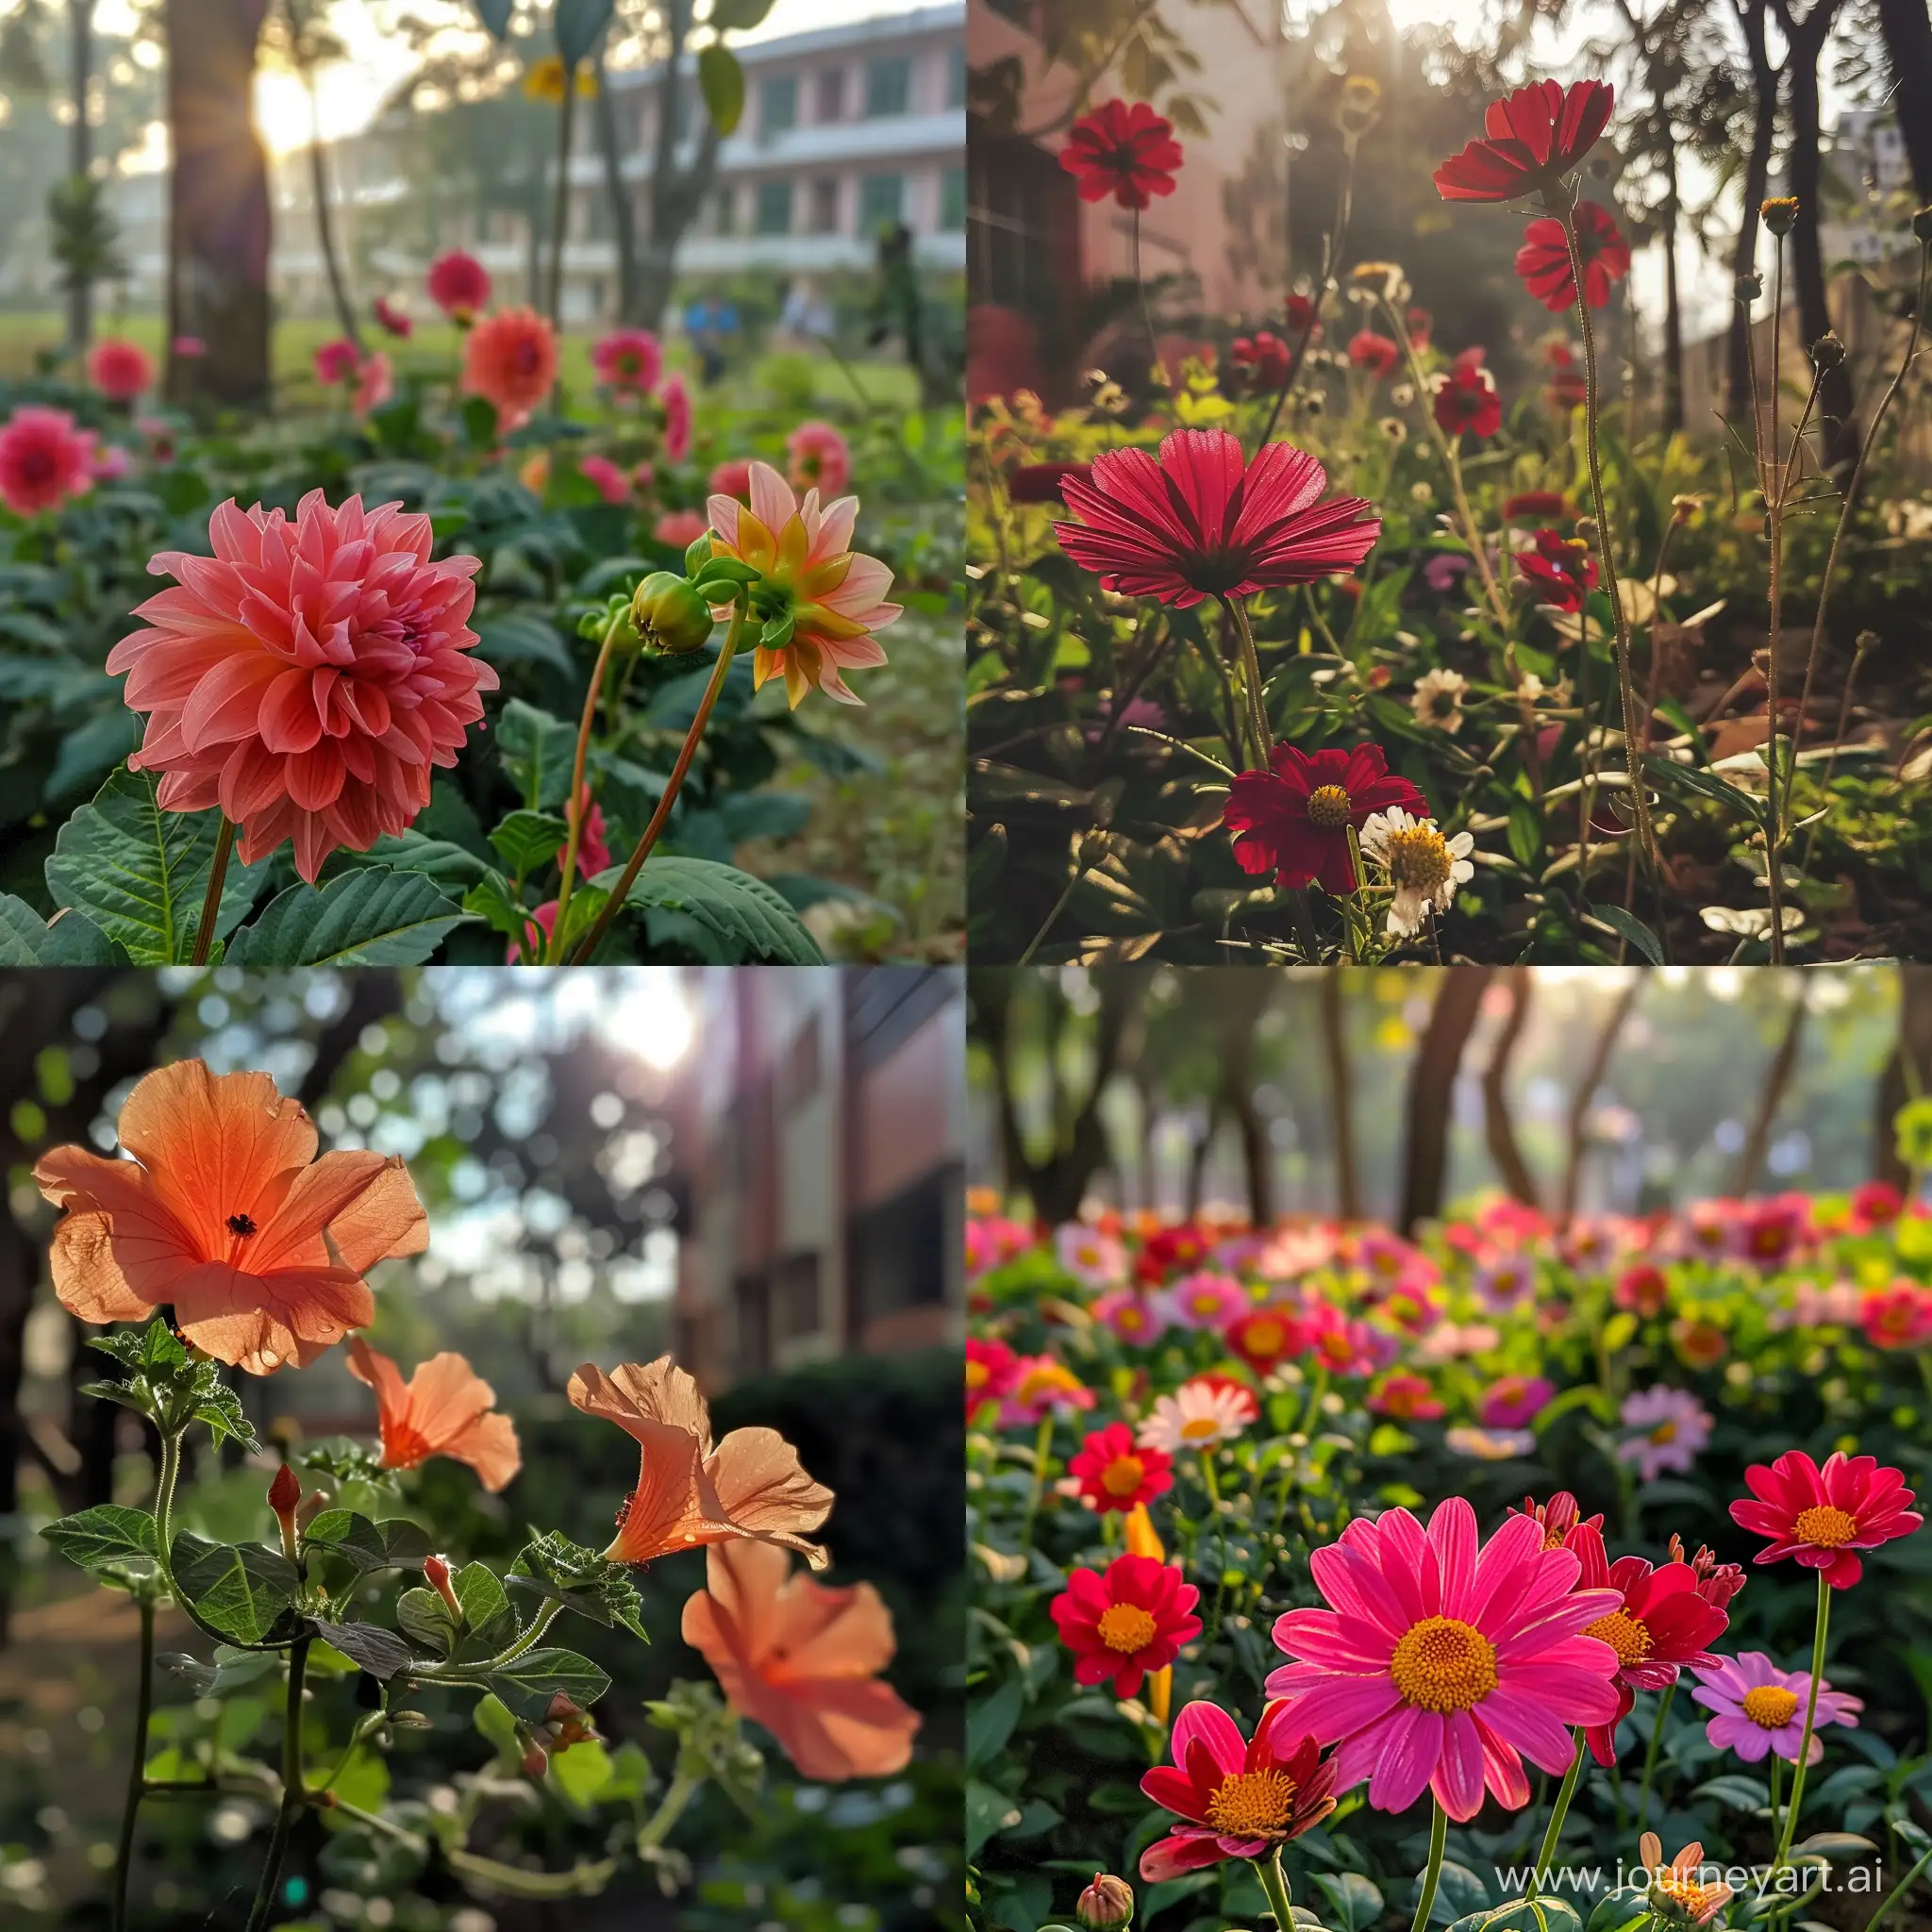 Beautiful flowers in college. Morning environment, capture using mobile phone